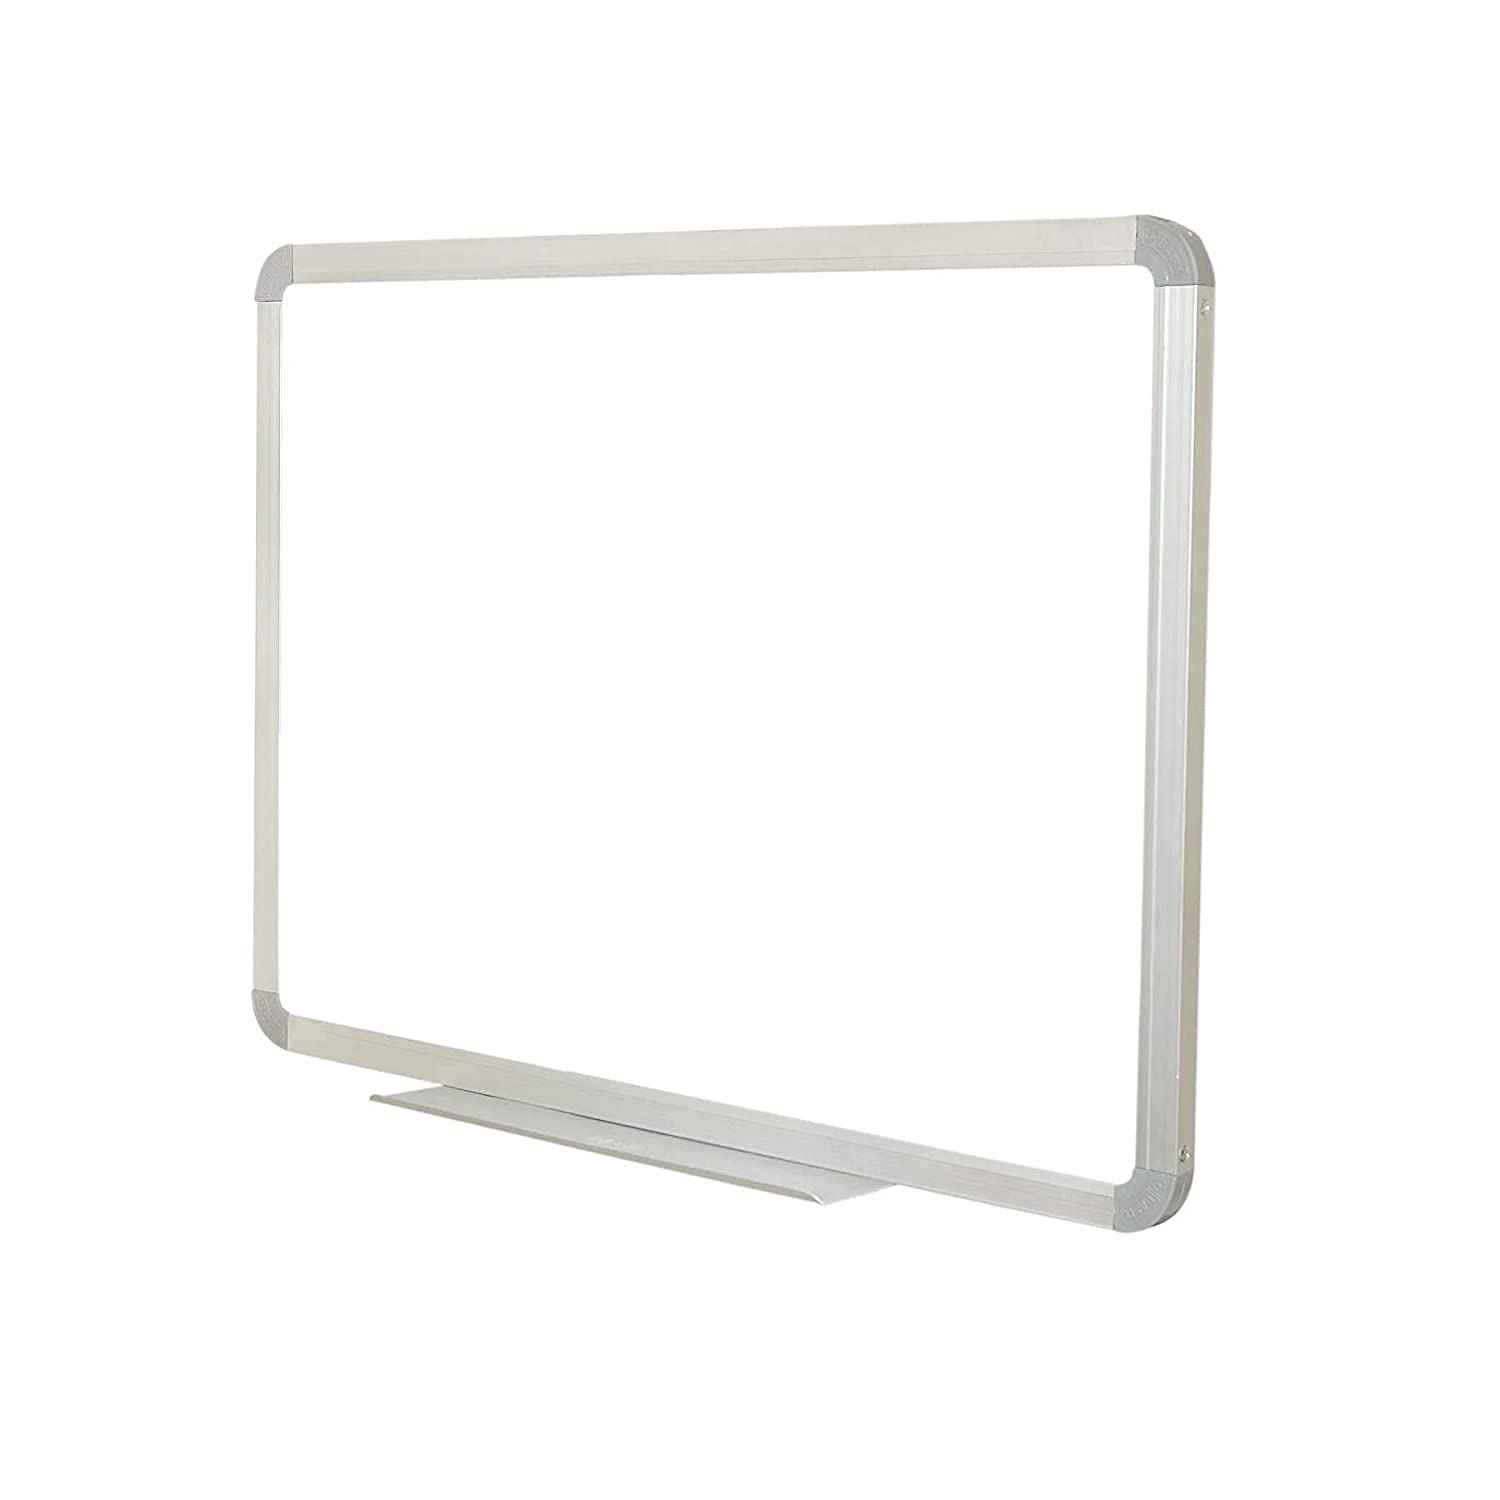 OBASIX® Superior Series White Board 4x8 Feet (Non-Magnetic) | Heavy Aluminium Frame with Movable and Adjustable Whiteboard Stand SMWBWS120240